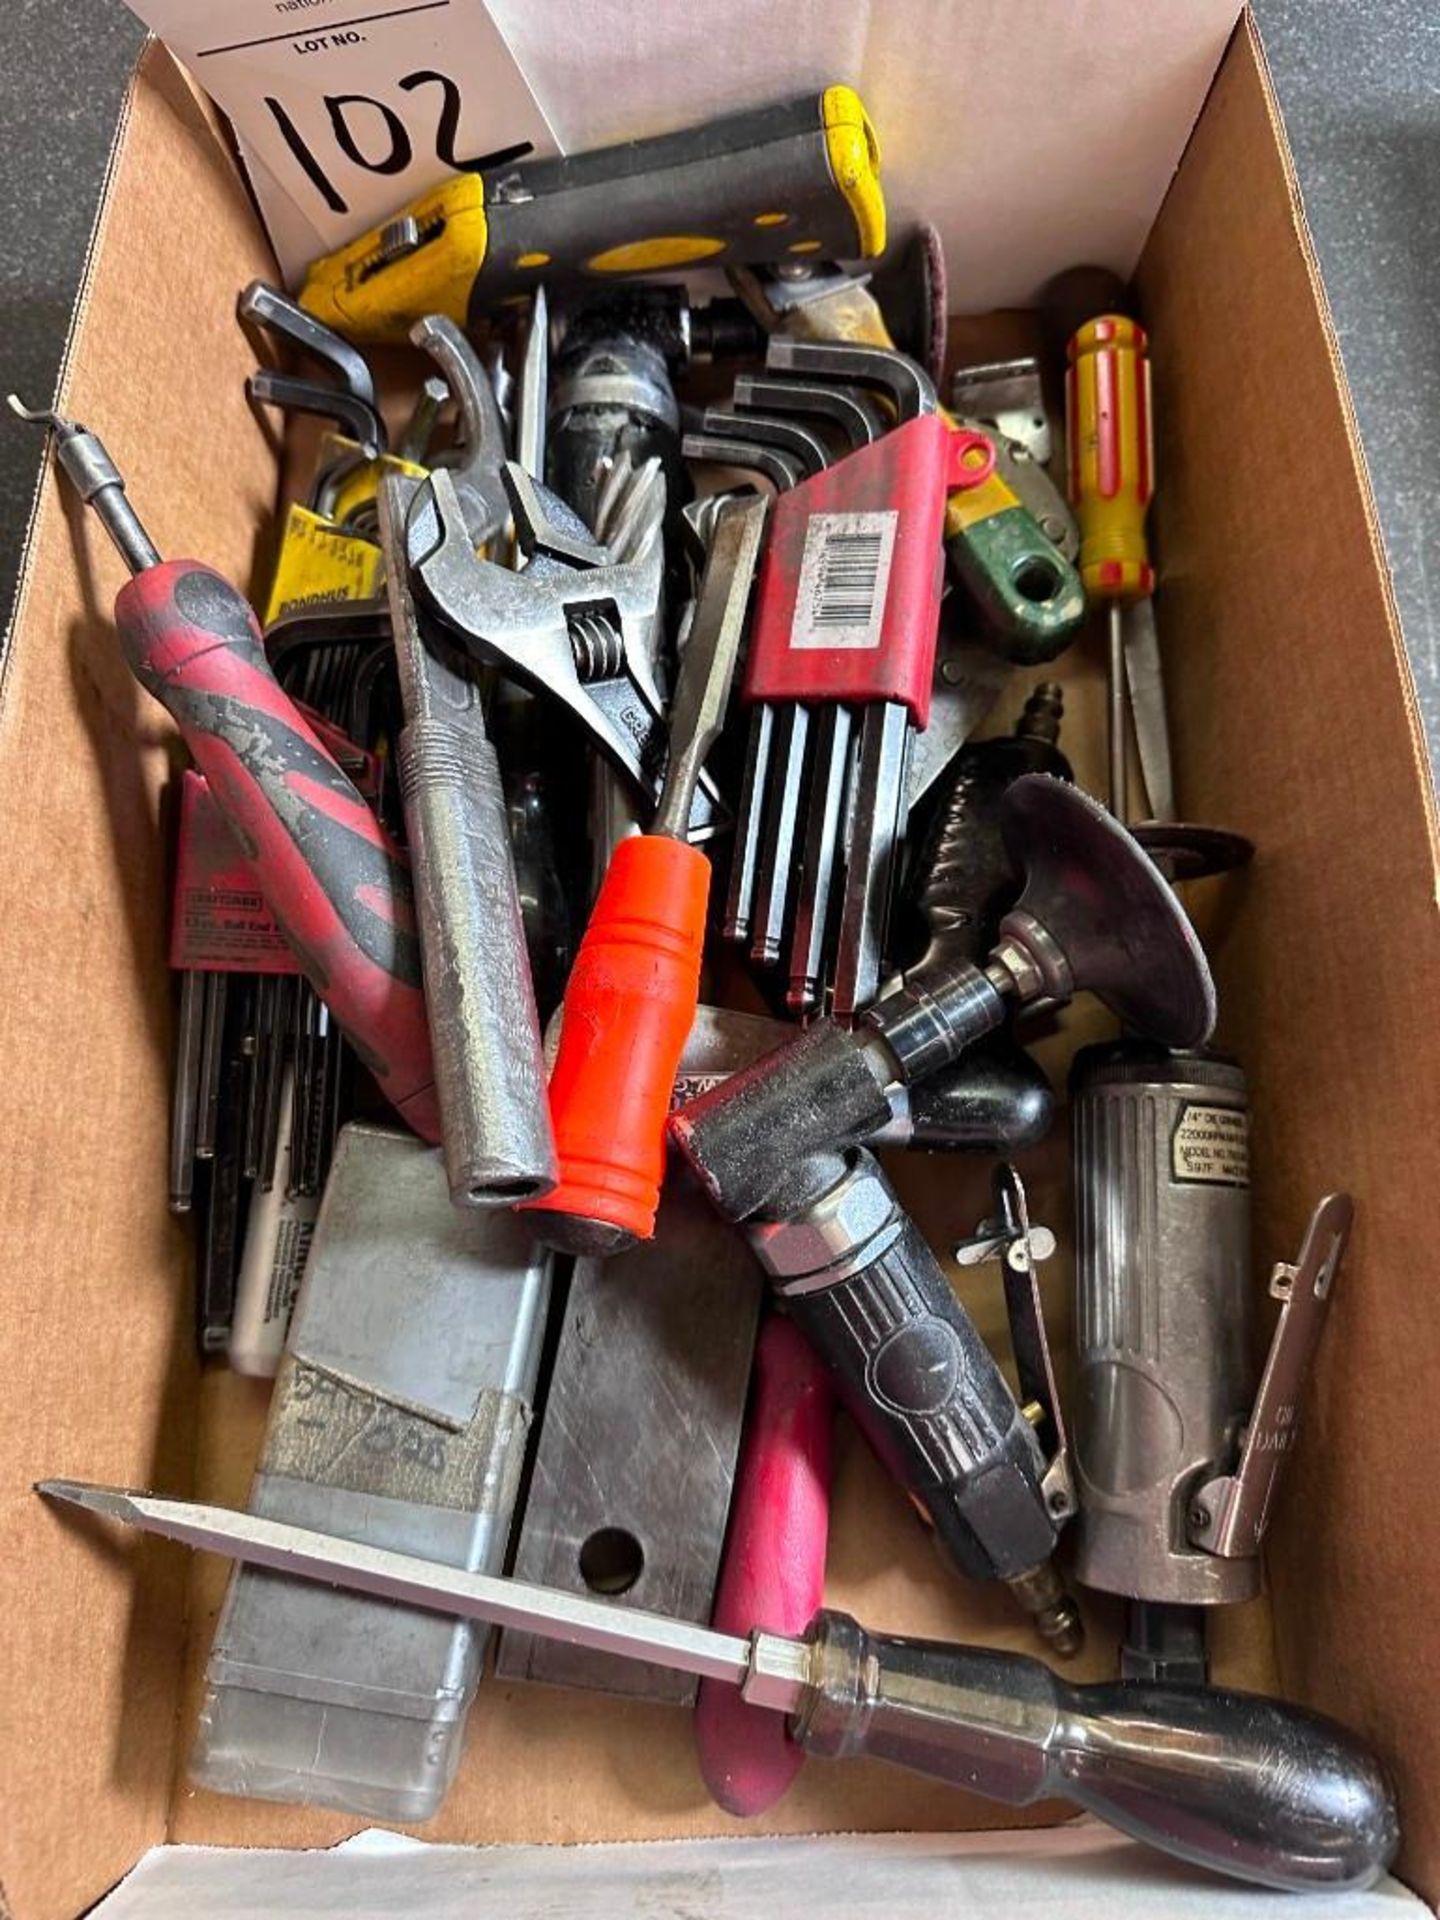 HAND TOOLS: AIR TOOLS, ALLEN WRENCHES, SCREWDRIVERS, ADJUSTABLE WRENCHES - Image 2 of 2